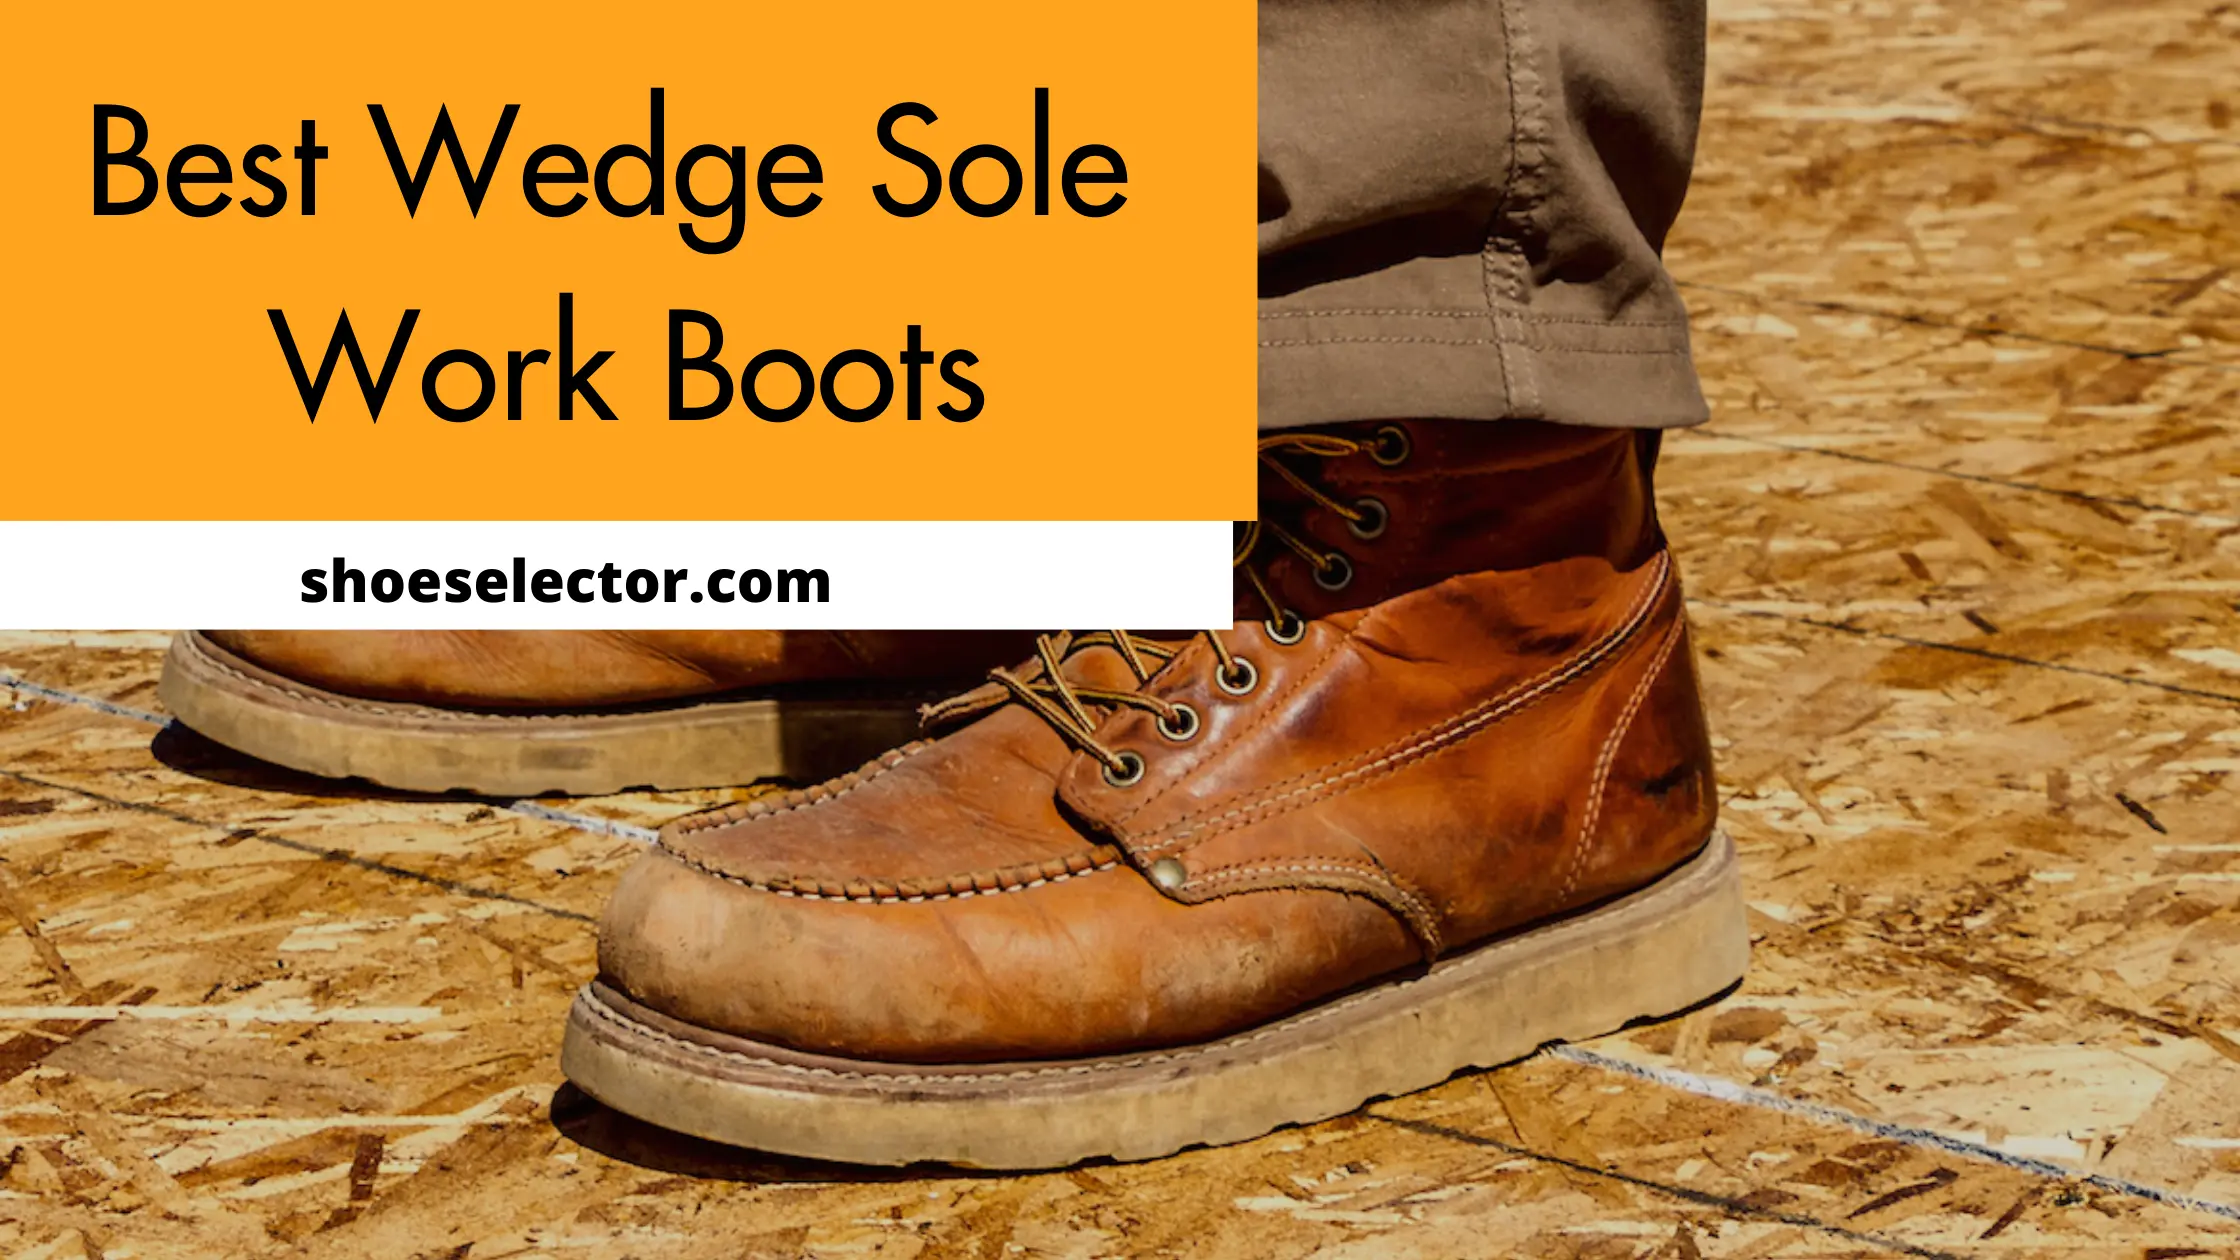 Best Wedge Sole Work Boots With Products Comparison